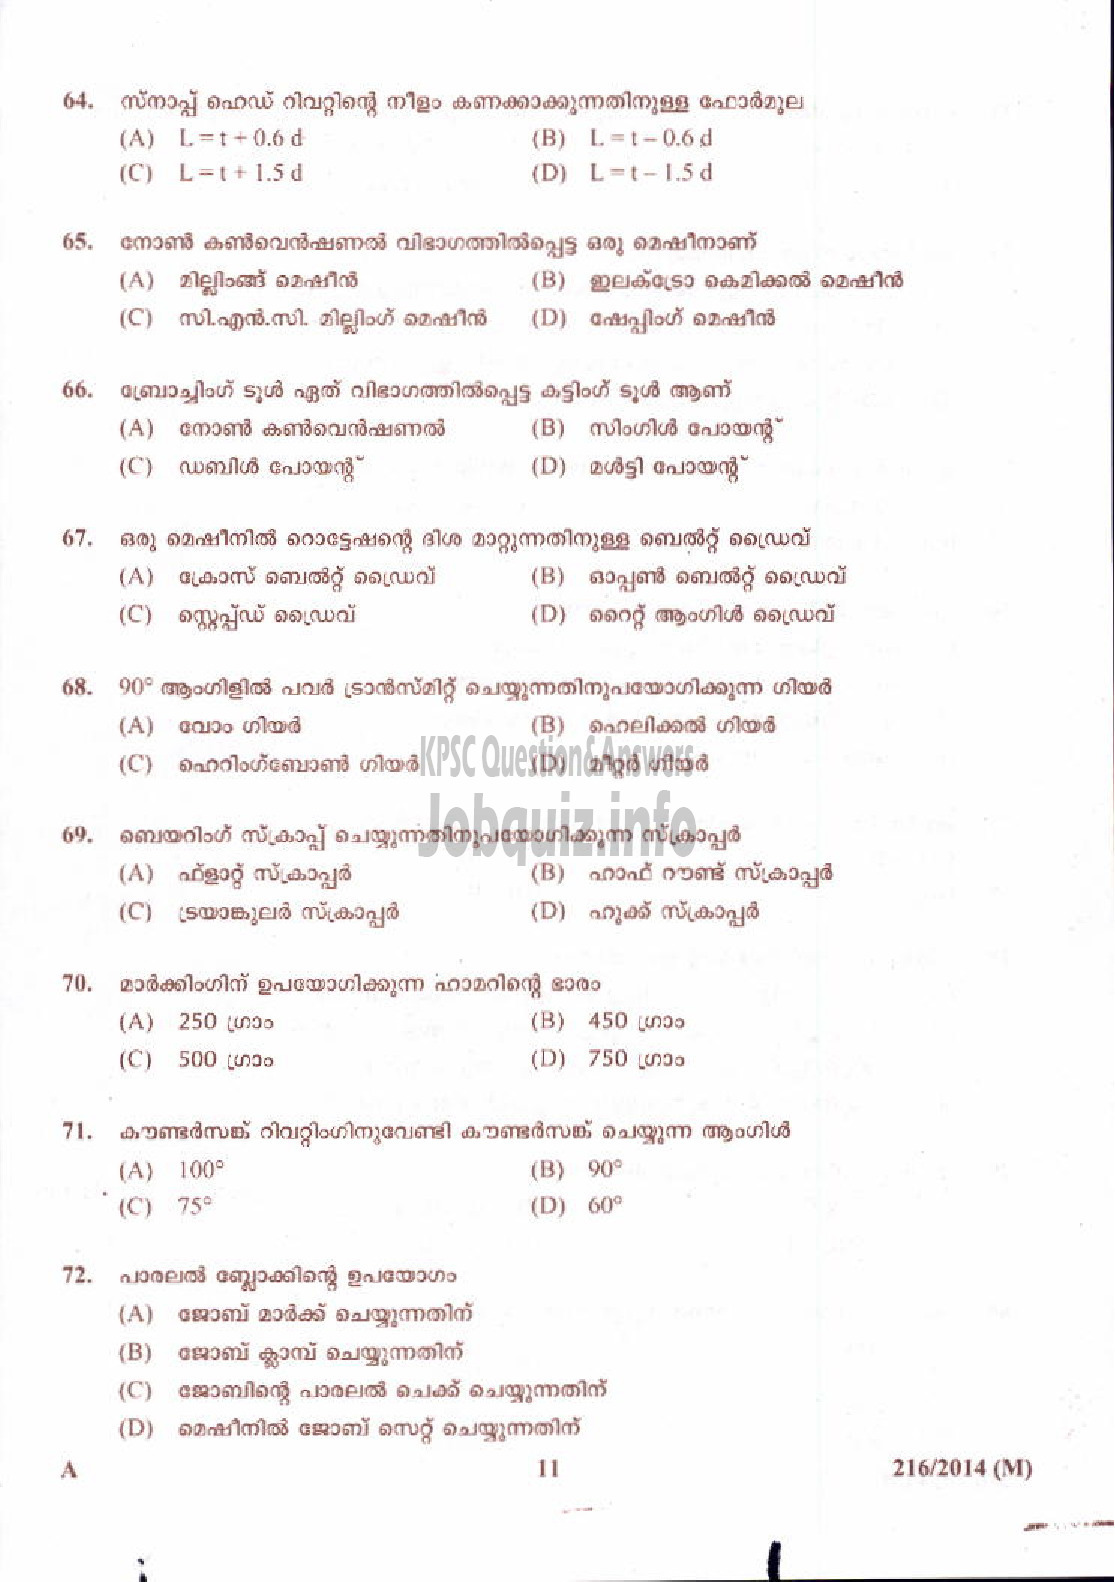 Kerala PSC Question Paper - FITTER AGRICULTURE-11